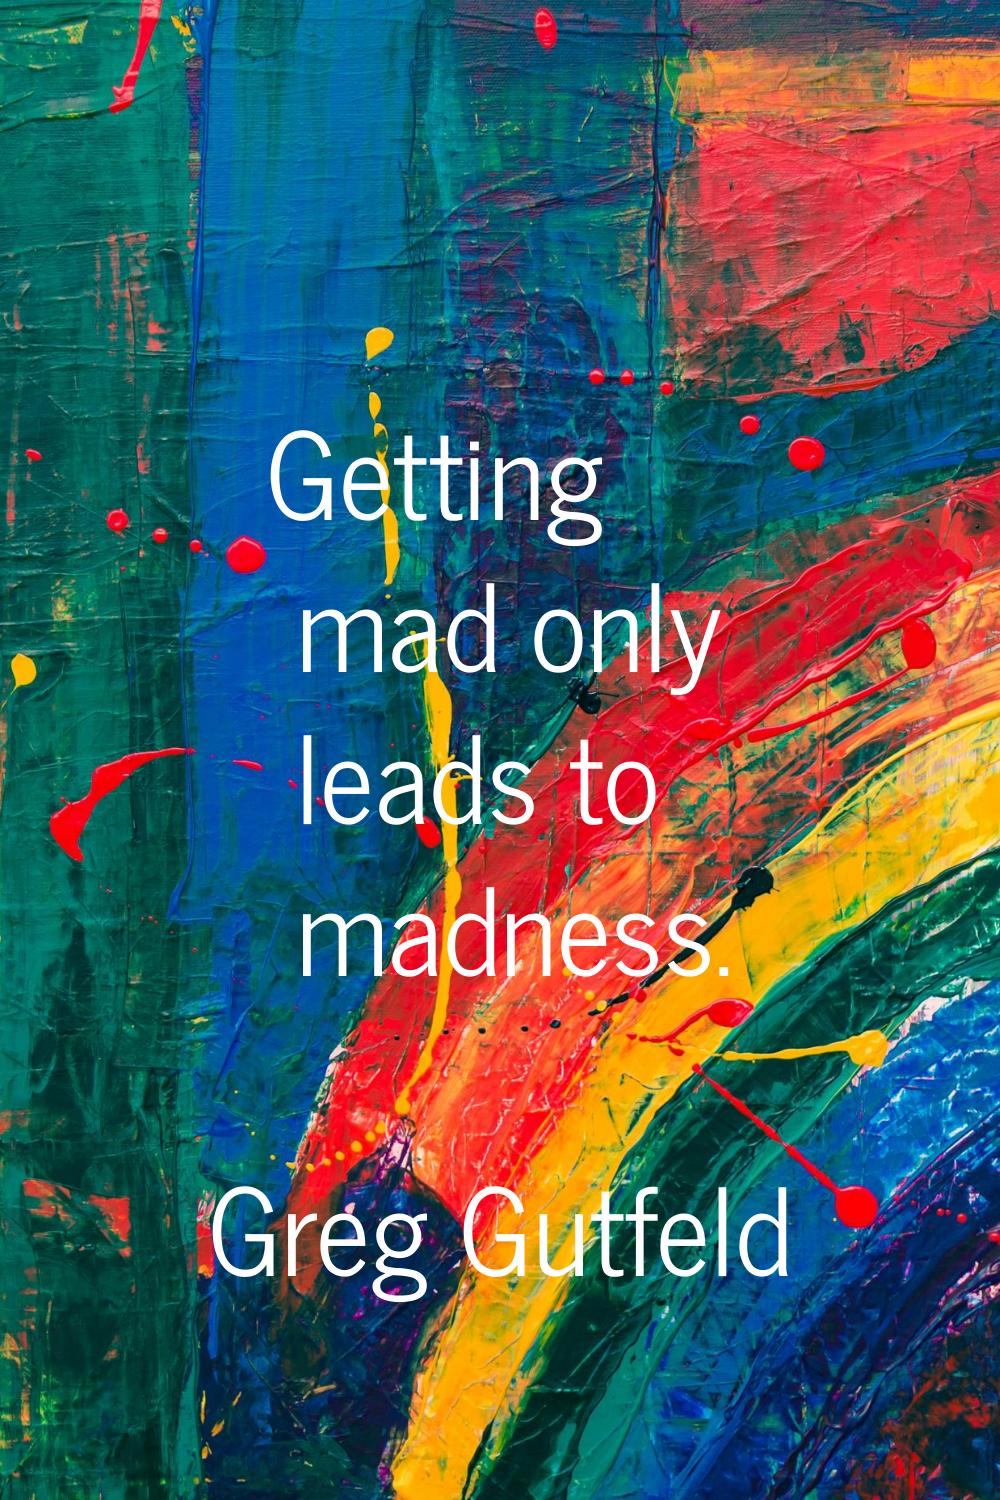 Getting mad only leads to madness.